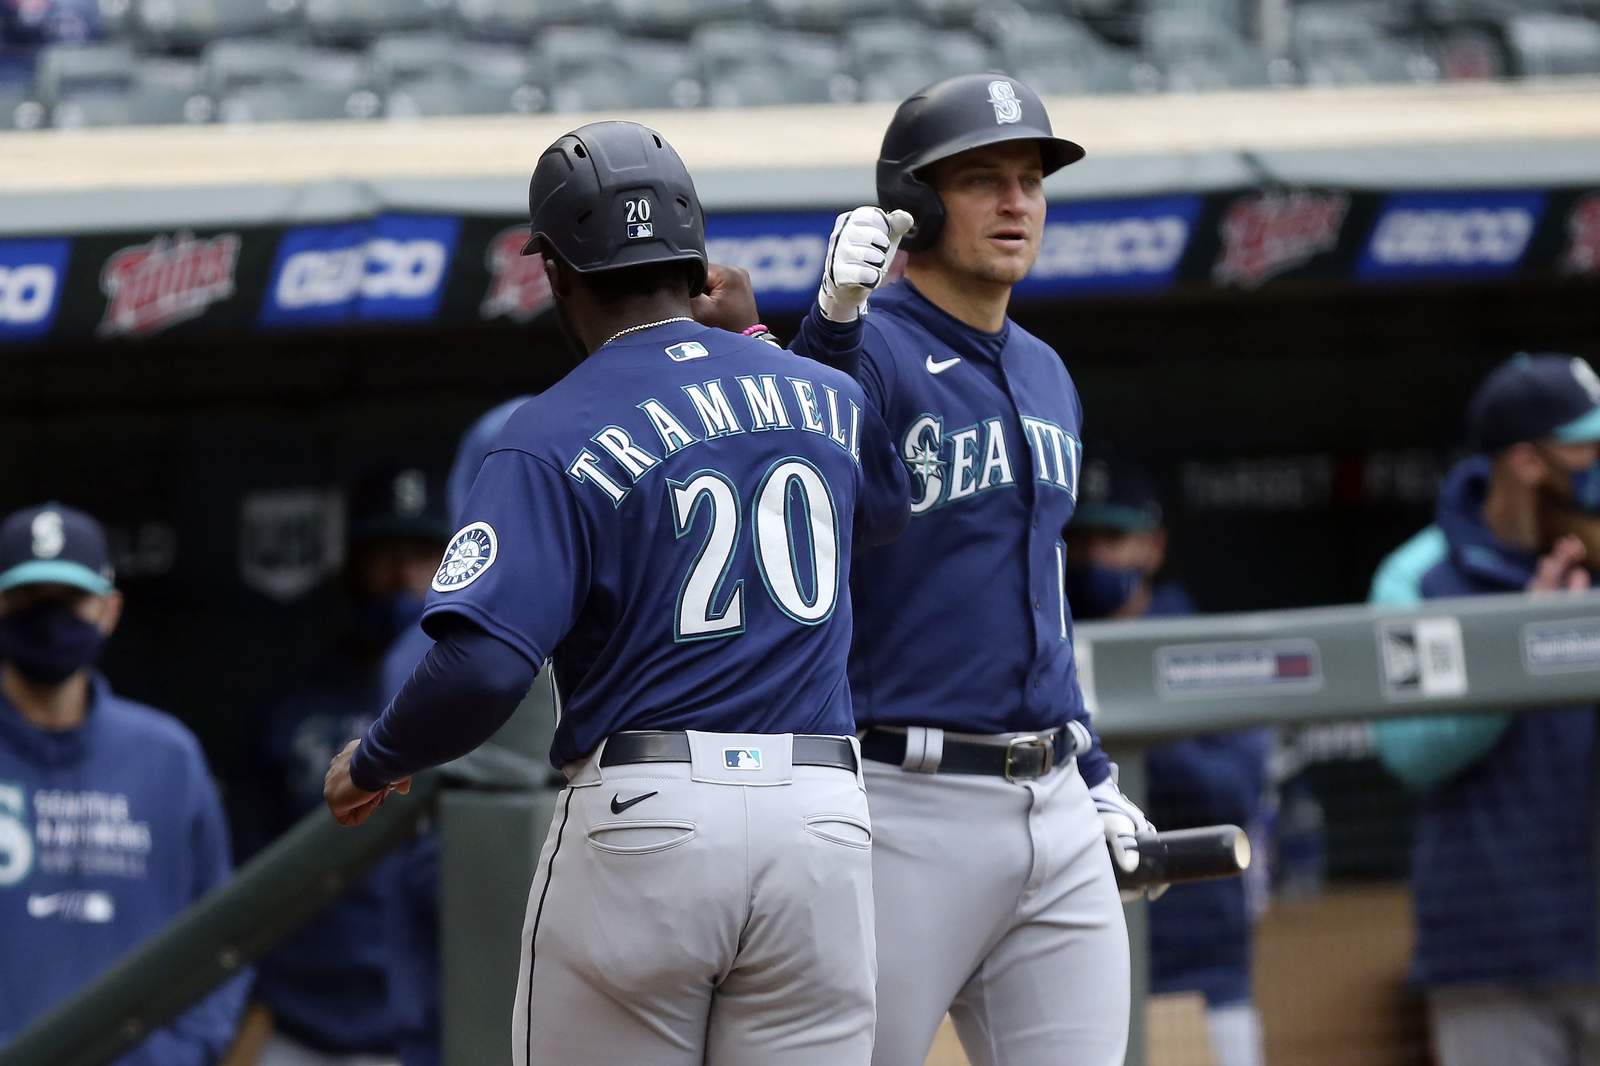 Haniger, Mariners win 4-3 as Twins' trouble in 10th persists